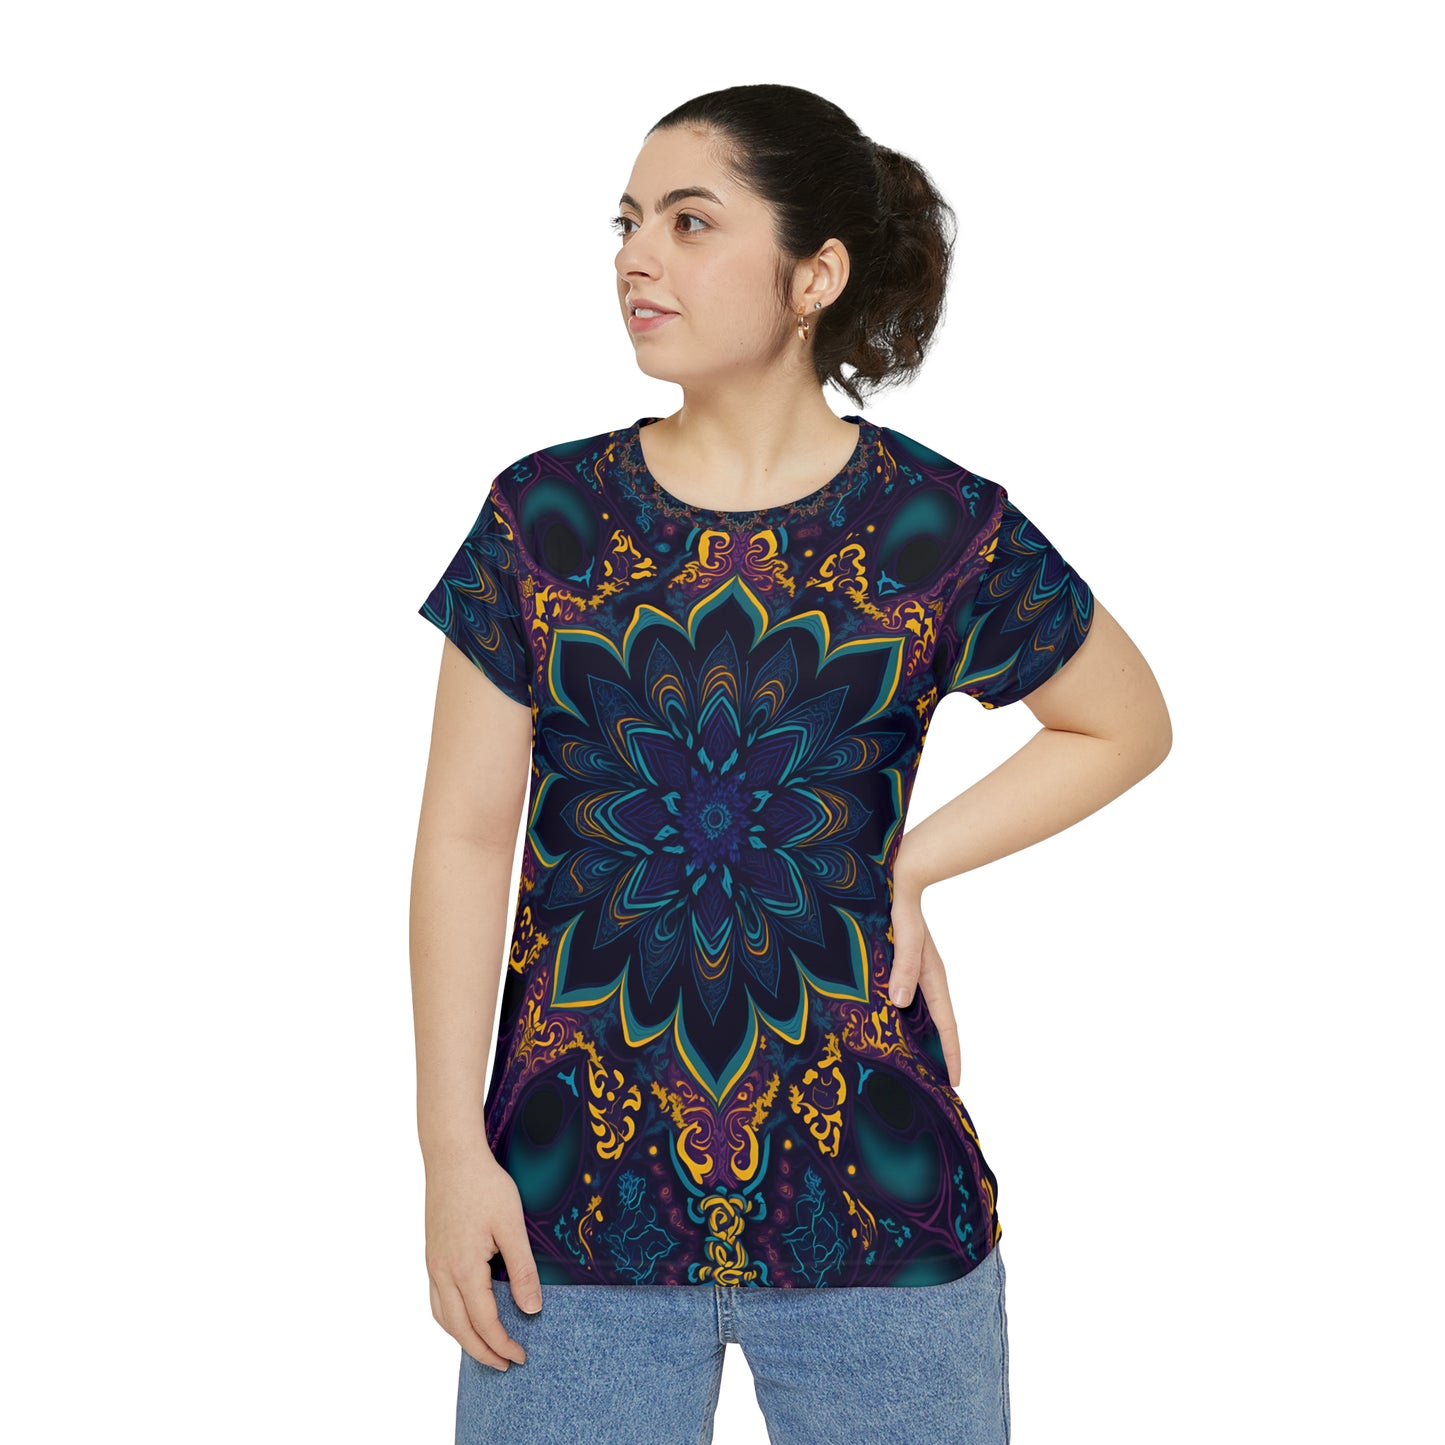 Blooming Geometry: The Floral Fractal - Women's Short Sleeve Shirt